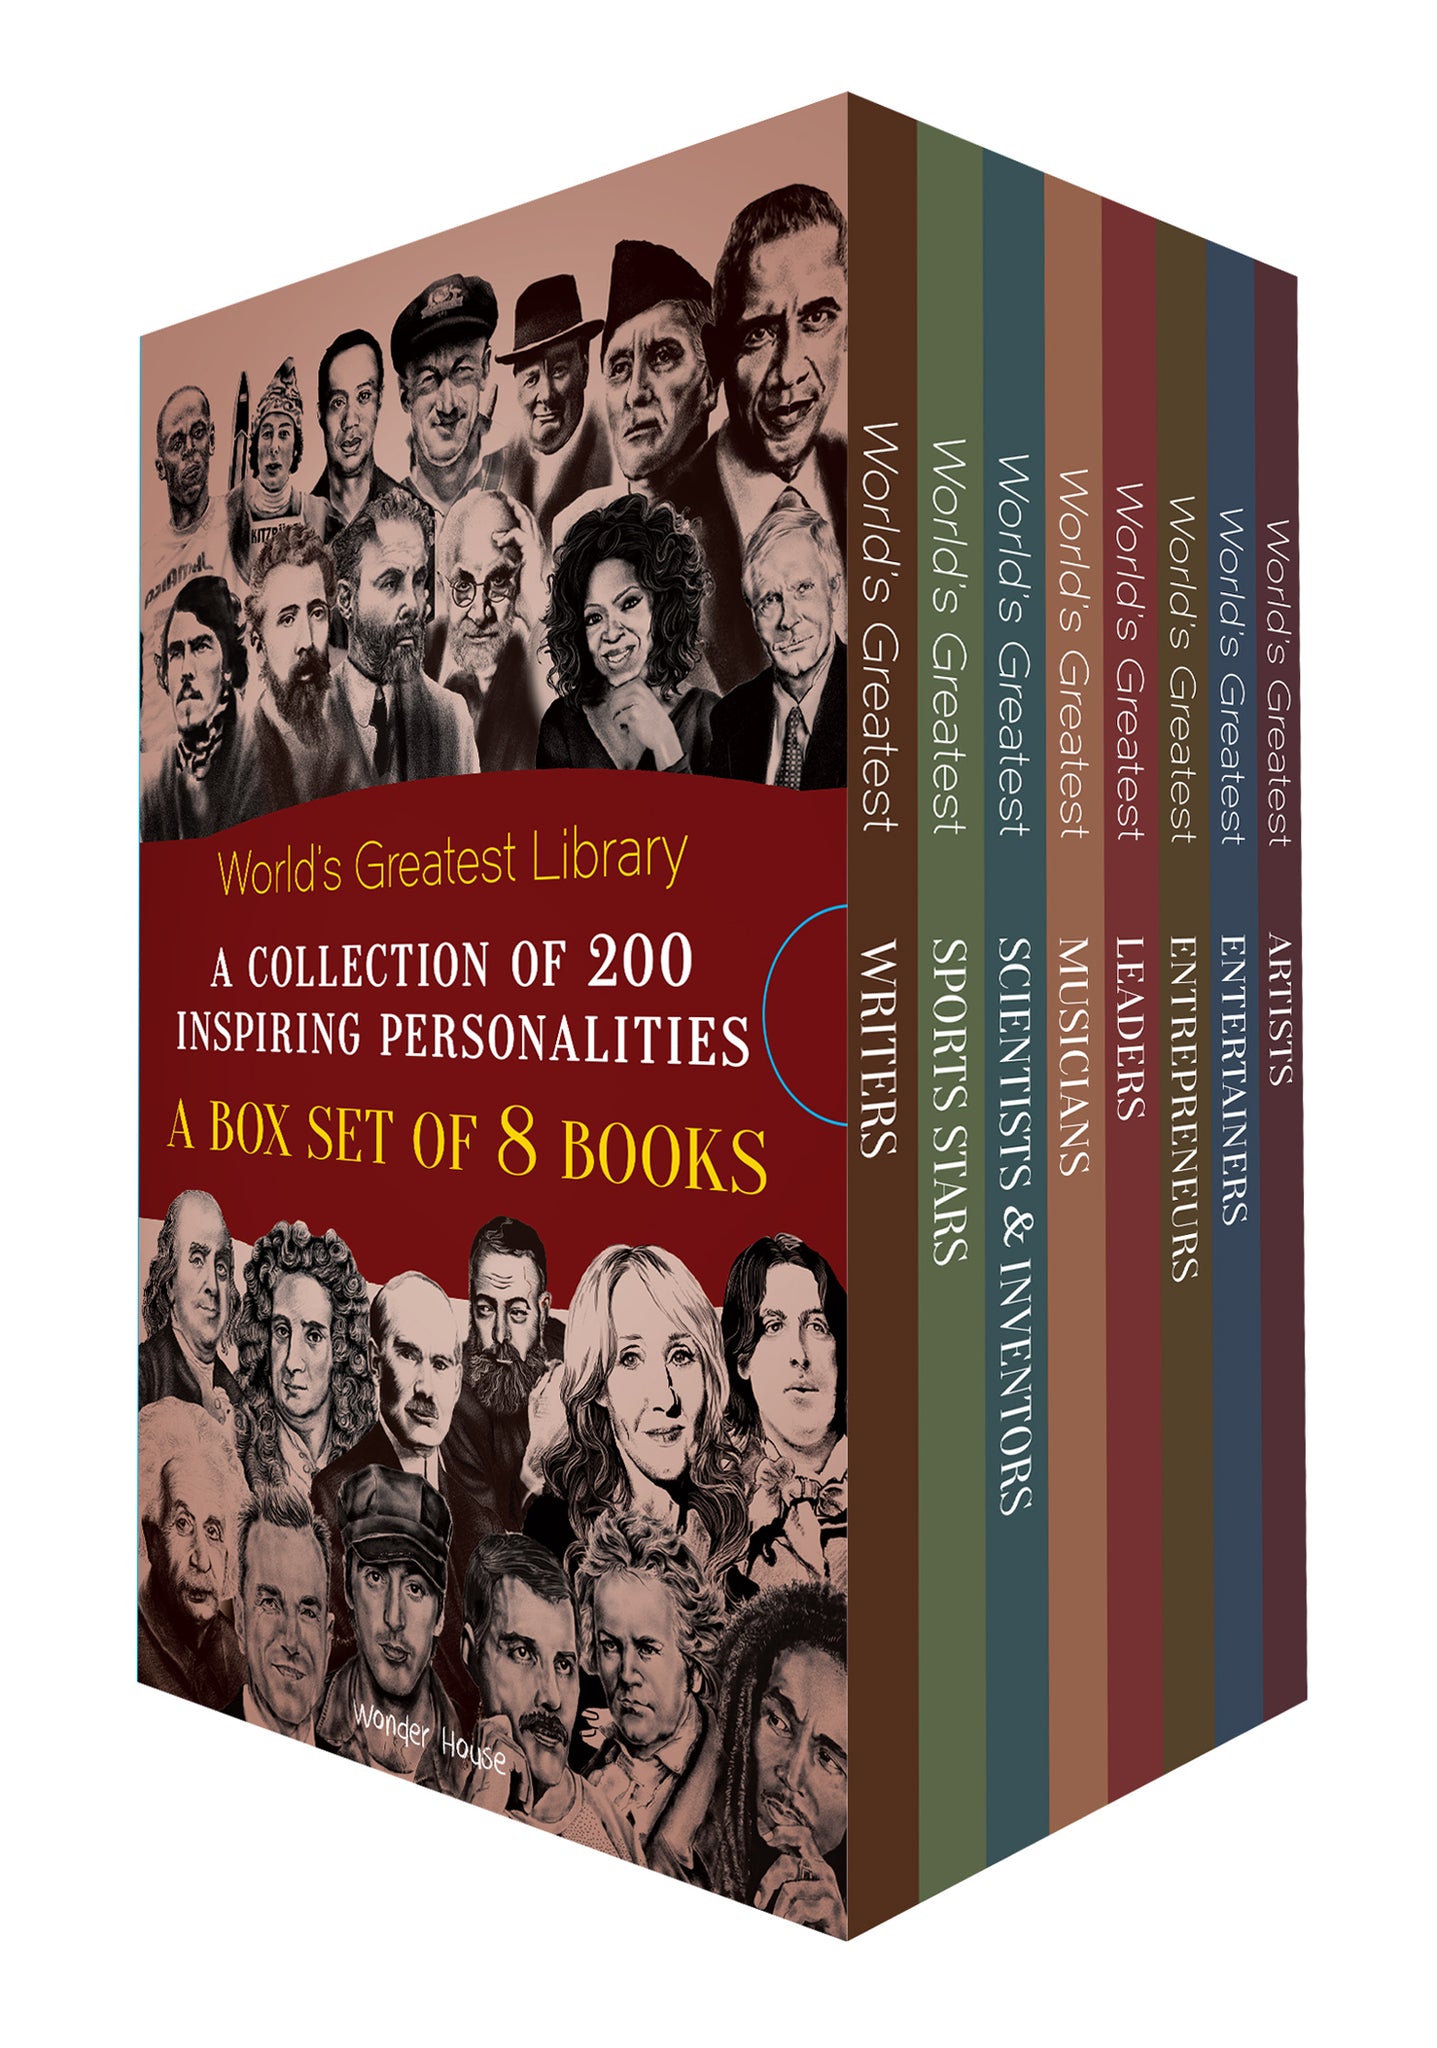 World's Greatest Library : A Collection of 200 Inspiring Personalities (Box Set of 8 Biographies)